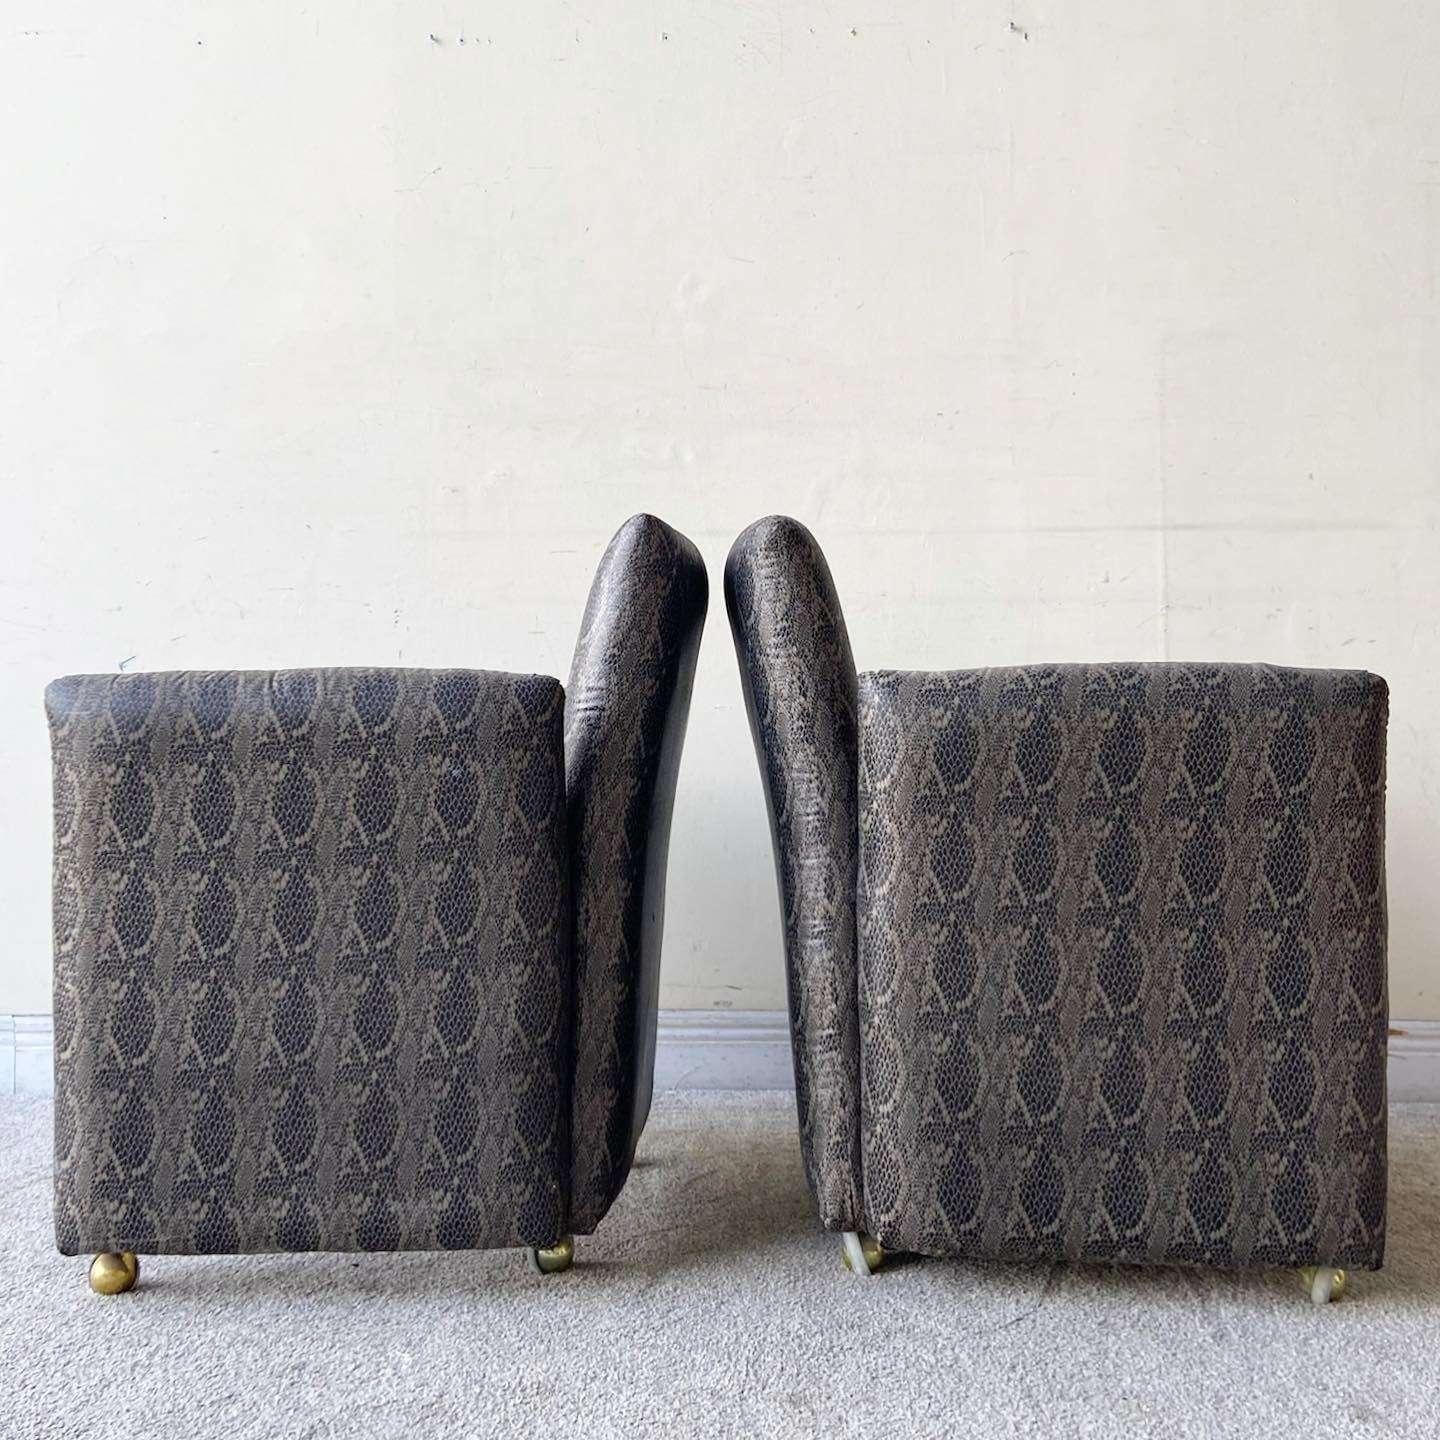 American Postmodern Faux Snake Skin Upholstered Chiclet Arm Chairs on Wheels - a Pair